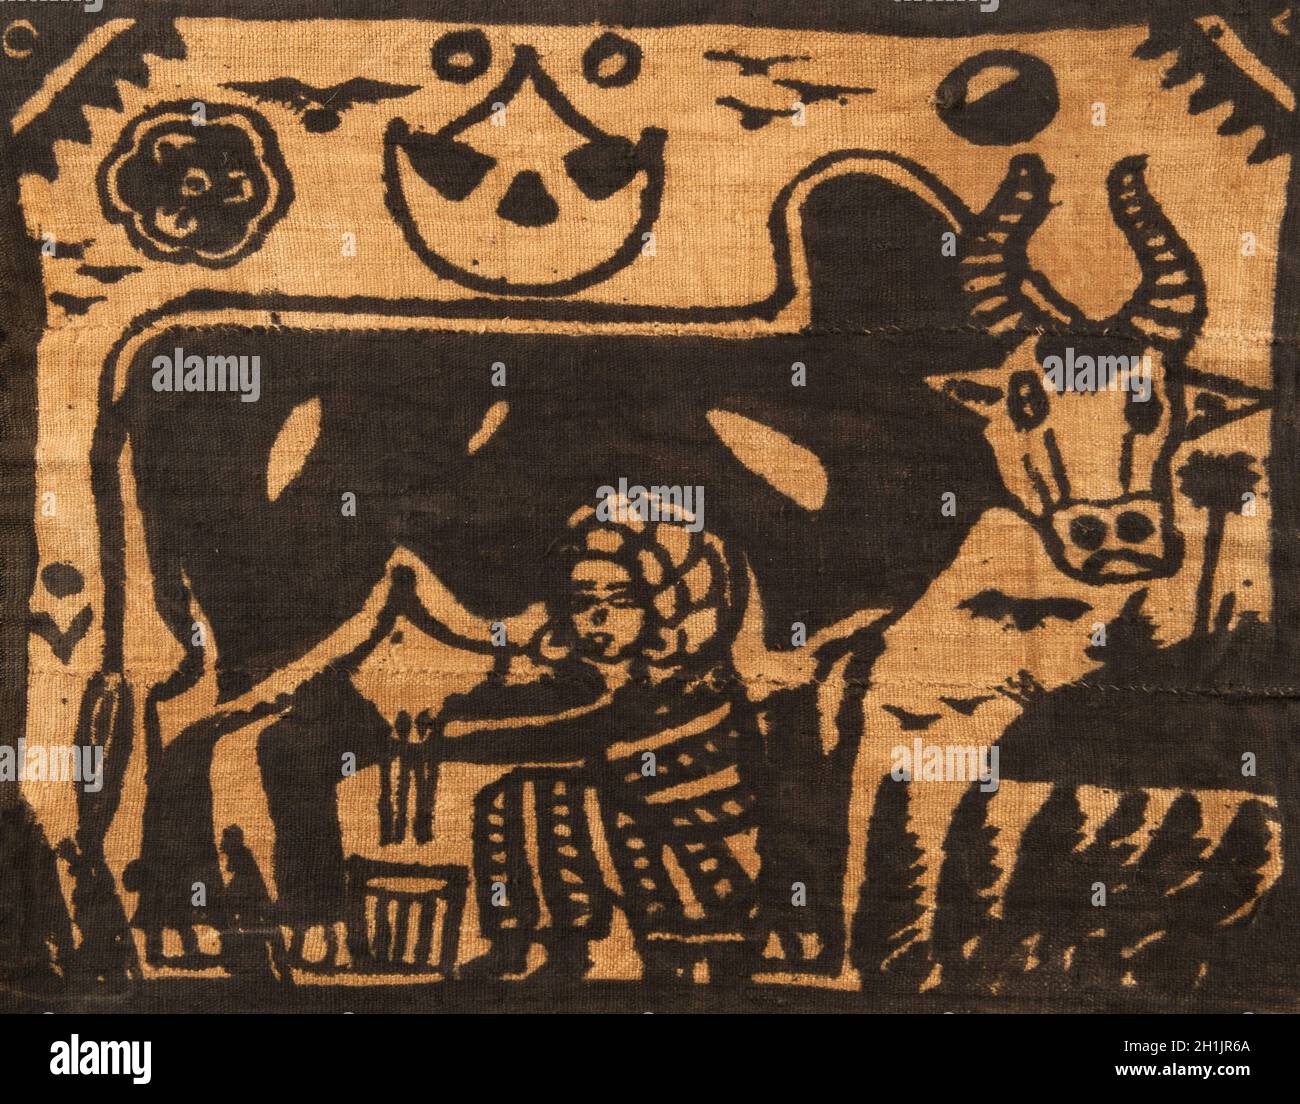 Traditional mud cloth, now called Bogolanfini depicting a figure of a woman milking a cow. The use of mud as a painting pattern on cotton is typical of the Bamana (Bamara) of Mali, centred on the Beledougou area north and northeast of Bamako. Women spin the locally-grown cotton, then men weave long bands that are joined together. The design of a Bogolanfini is traditionally made by women, though this cloth was made to sell to tourists and was made by a boy. Stock Photo